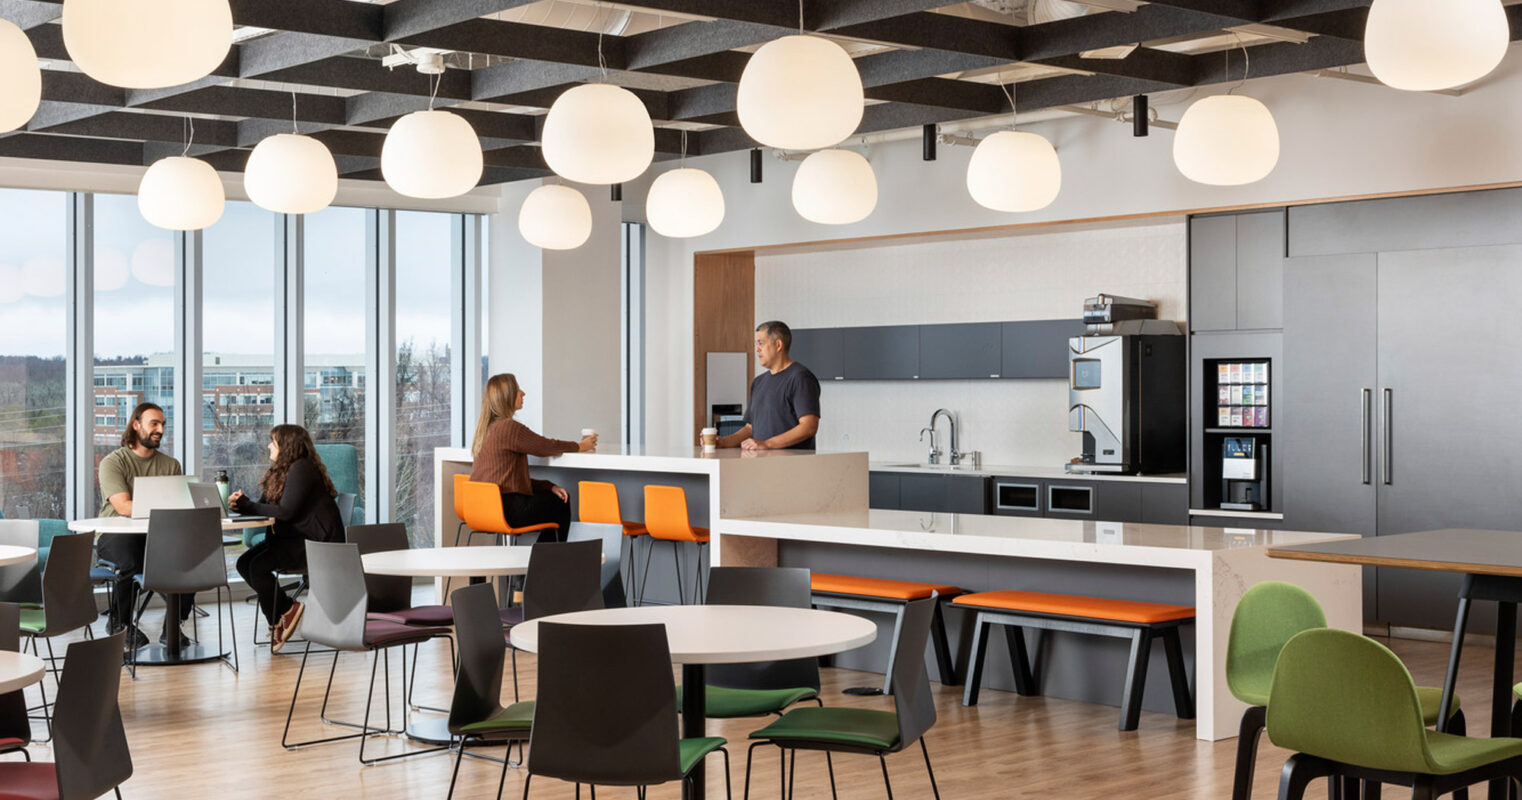 Spacious modern office break room with varied seating arrangements includes a kitchenette, large windows offering natural light, round pendant lights, and a combination of vibrant and neutral color palette enhancing the welcoming ambiance.